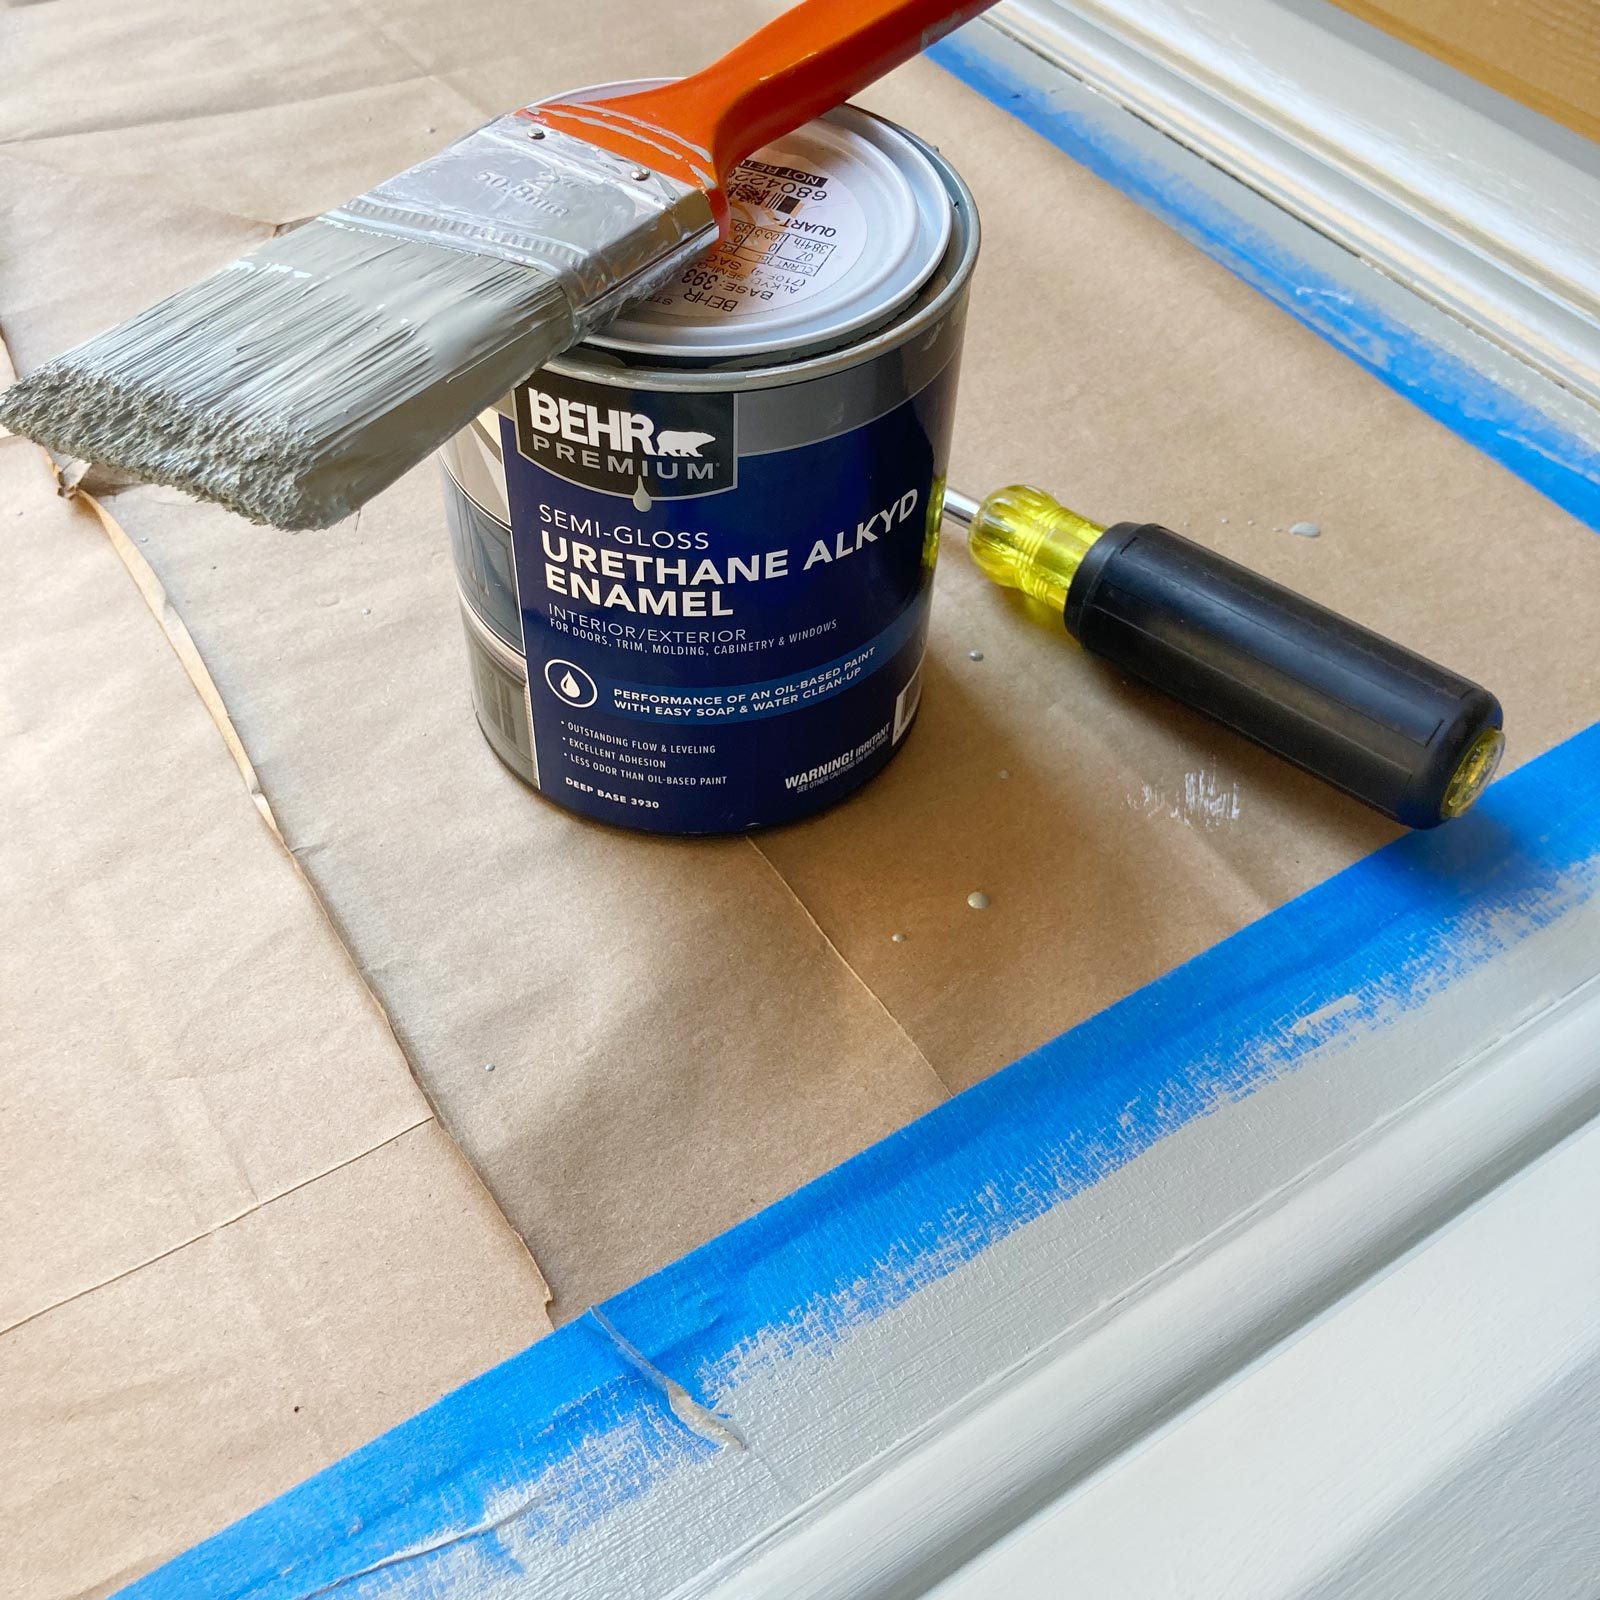 How To Paint a Mirror Frame (DIY)